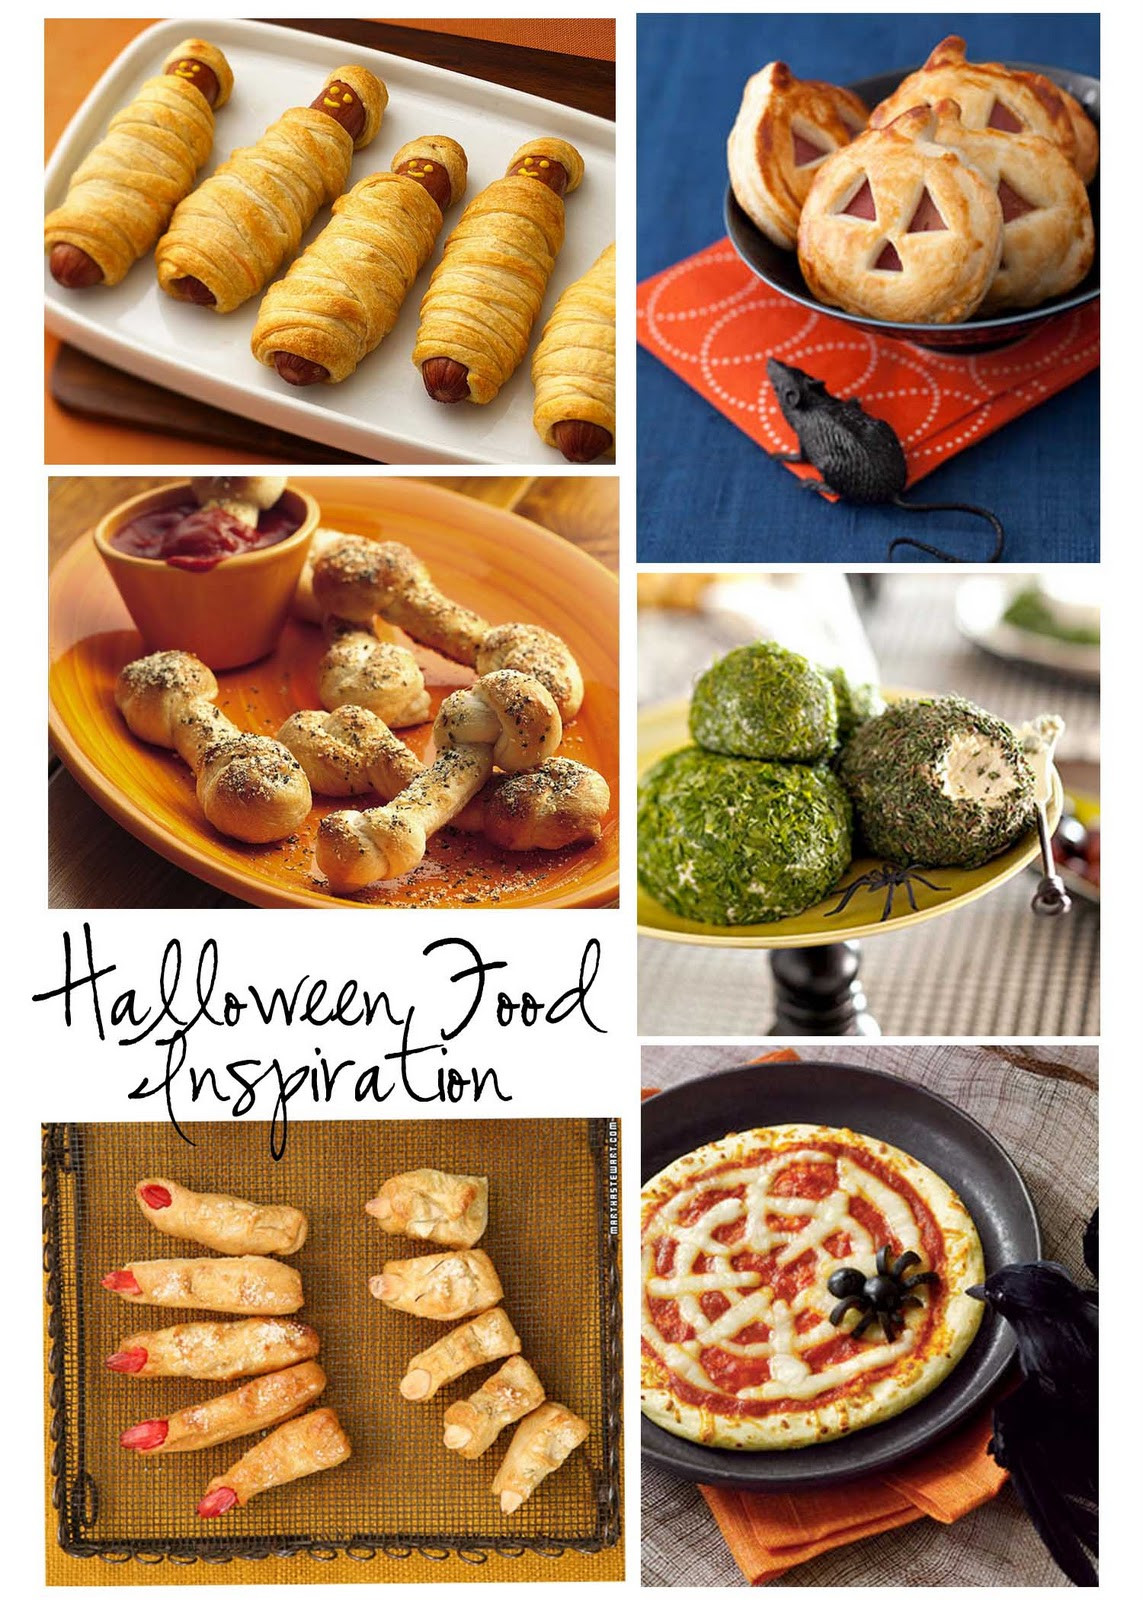 Halloween Party Foods Ideas
 Room to Inspire Spooky Food Ideas